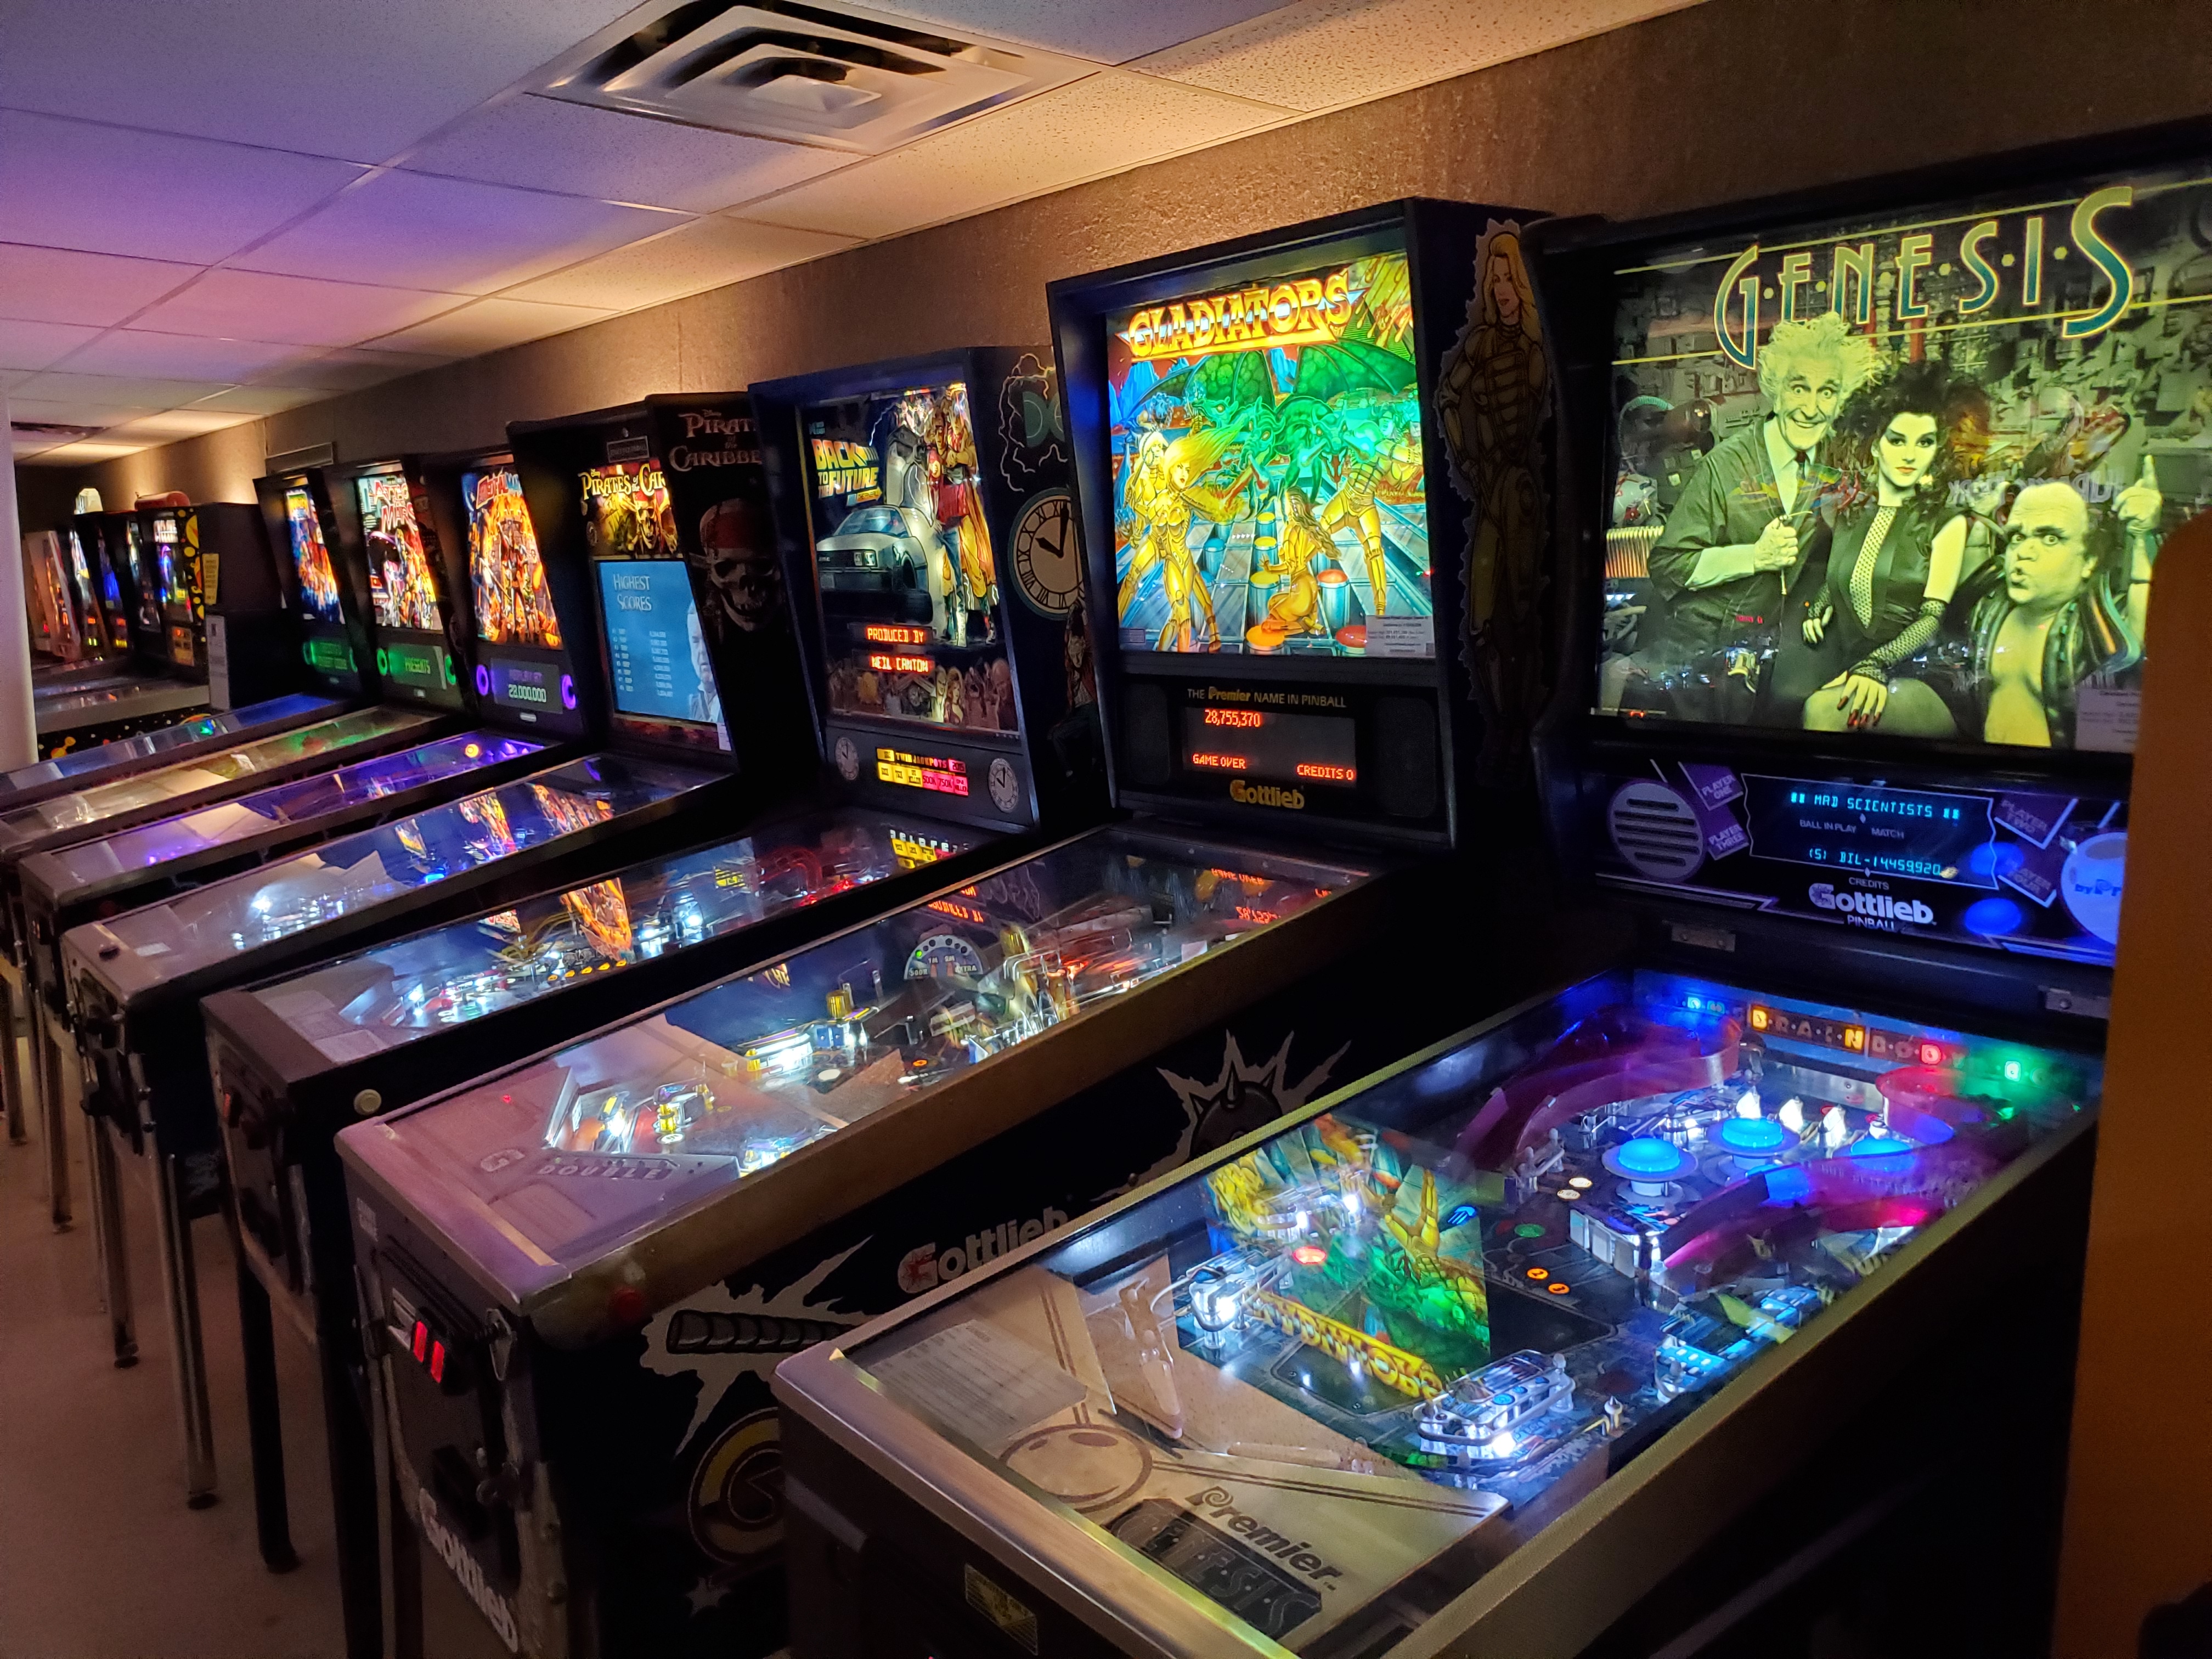 Project Pinball places first machine in Alabama—learn why it matters